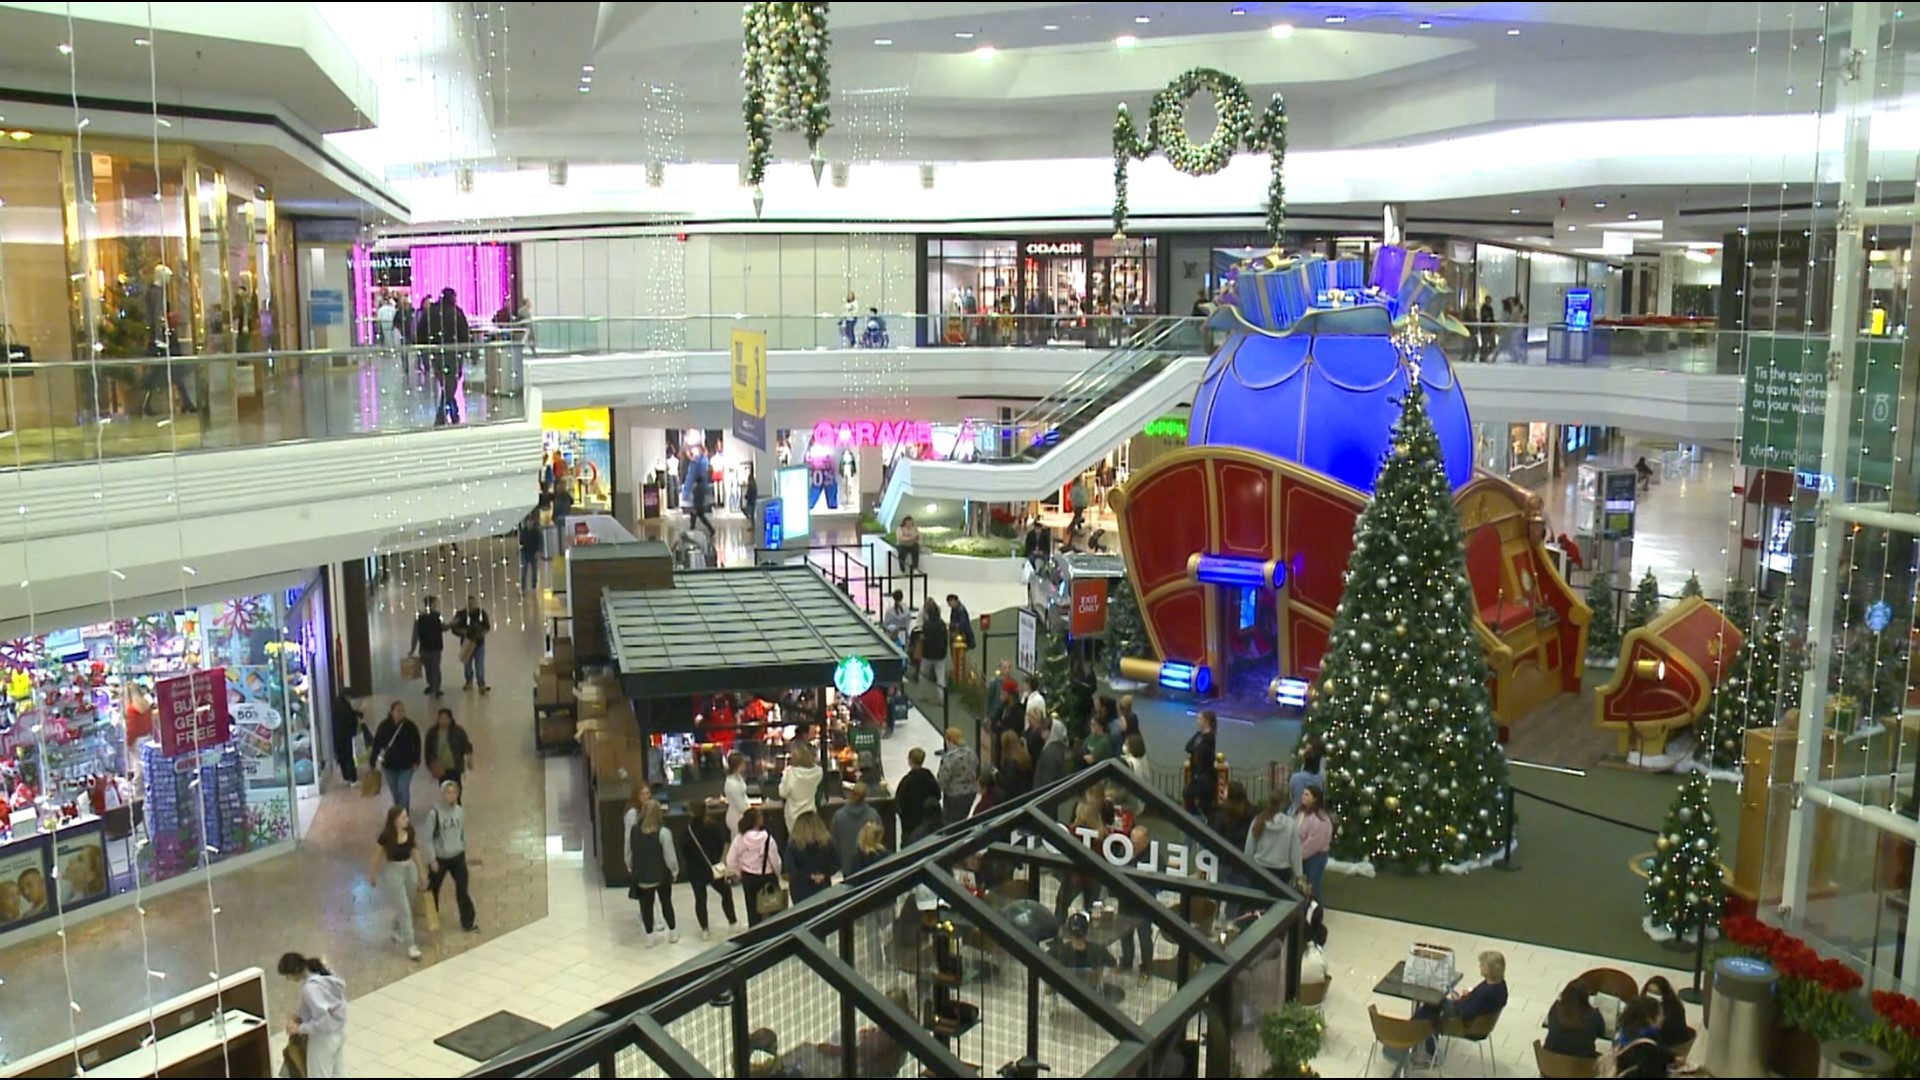 Many mall shoppers said this day is more about spending time with family and friends than spending money, especially after a couple of years off due to the pandemic.